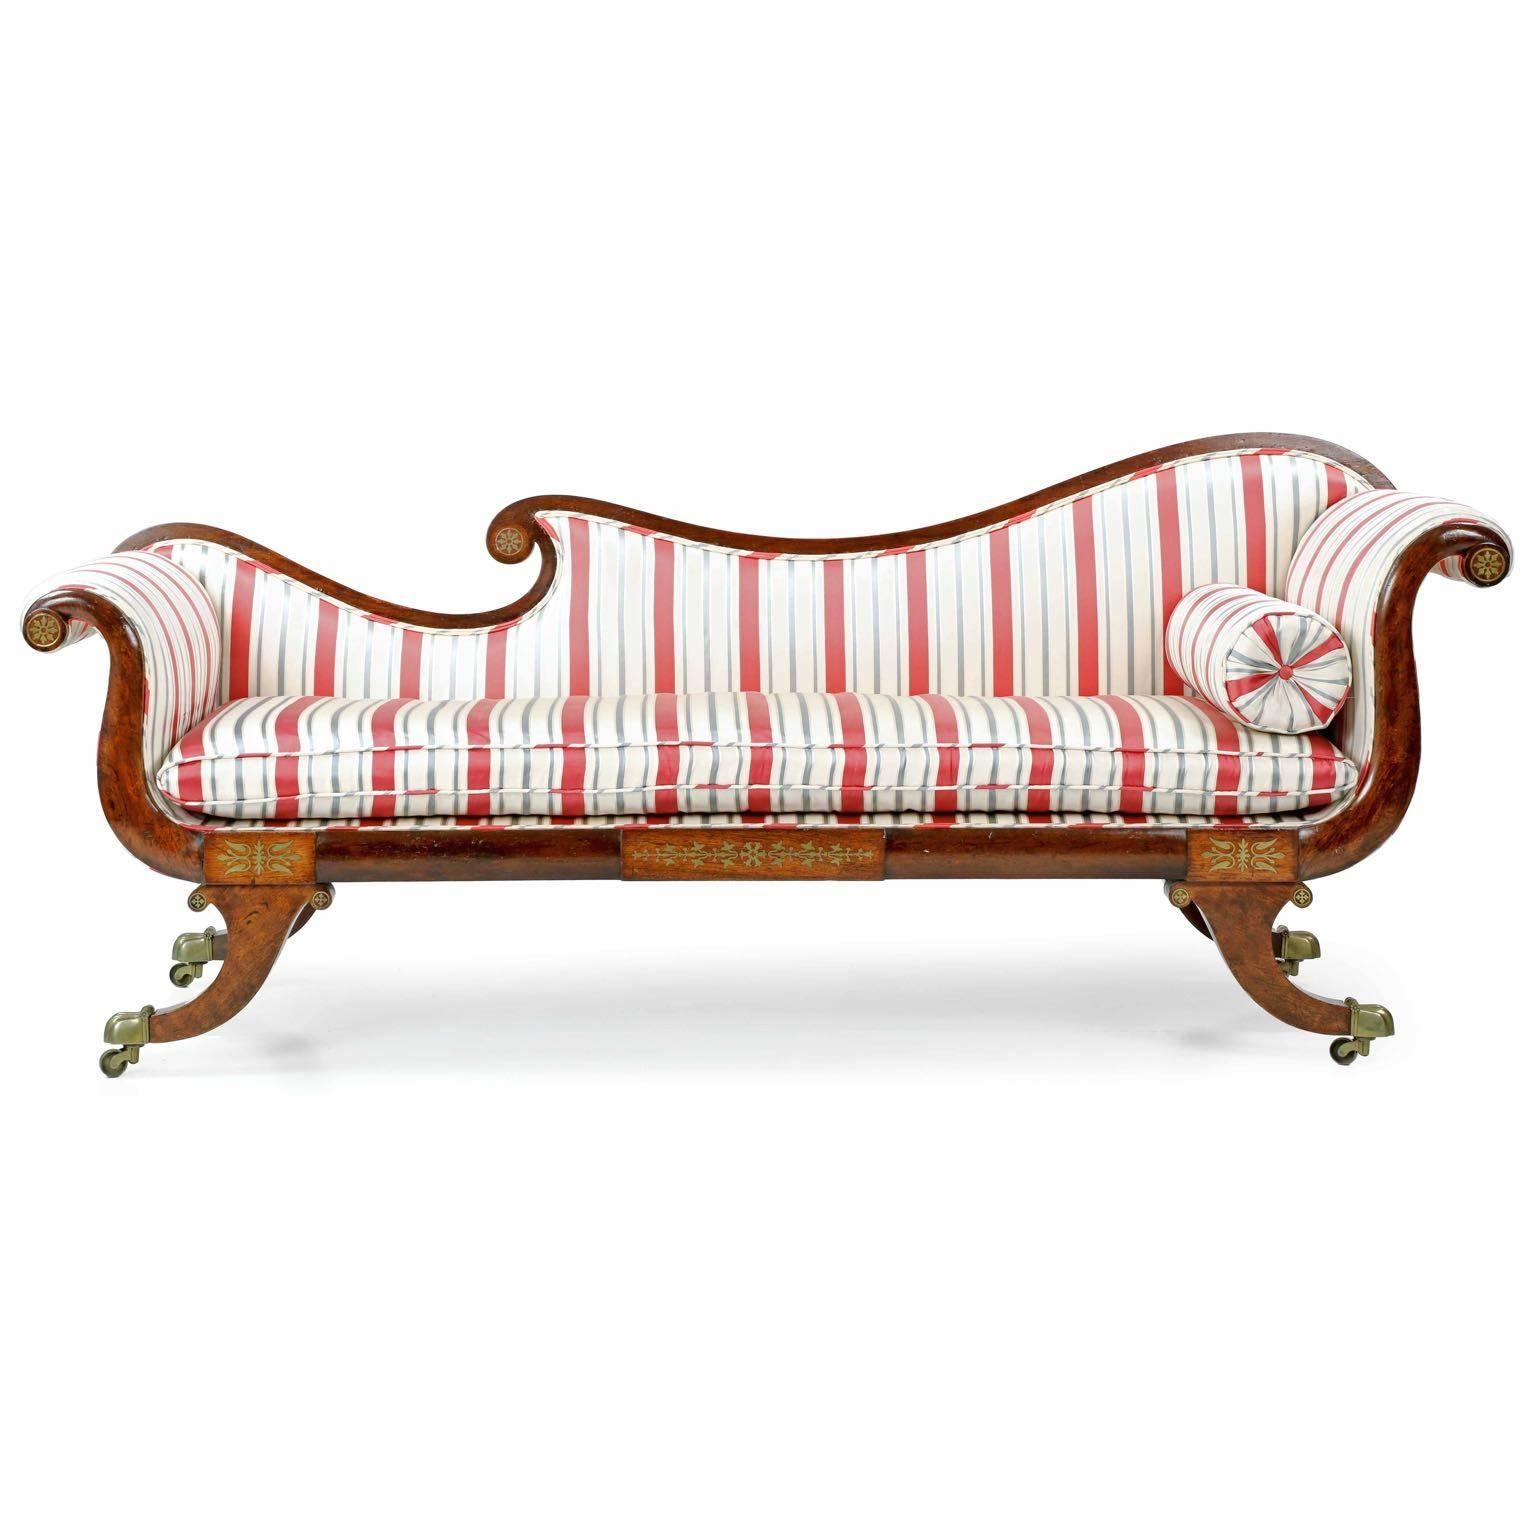 With an elegant curvature borrowed directly from the classical Greek designs so highly sought after during the first quarter of the 19th Century, this exquisite recamier is of superb quality with very fine craftsmanship throughout.  The dense and